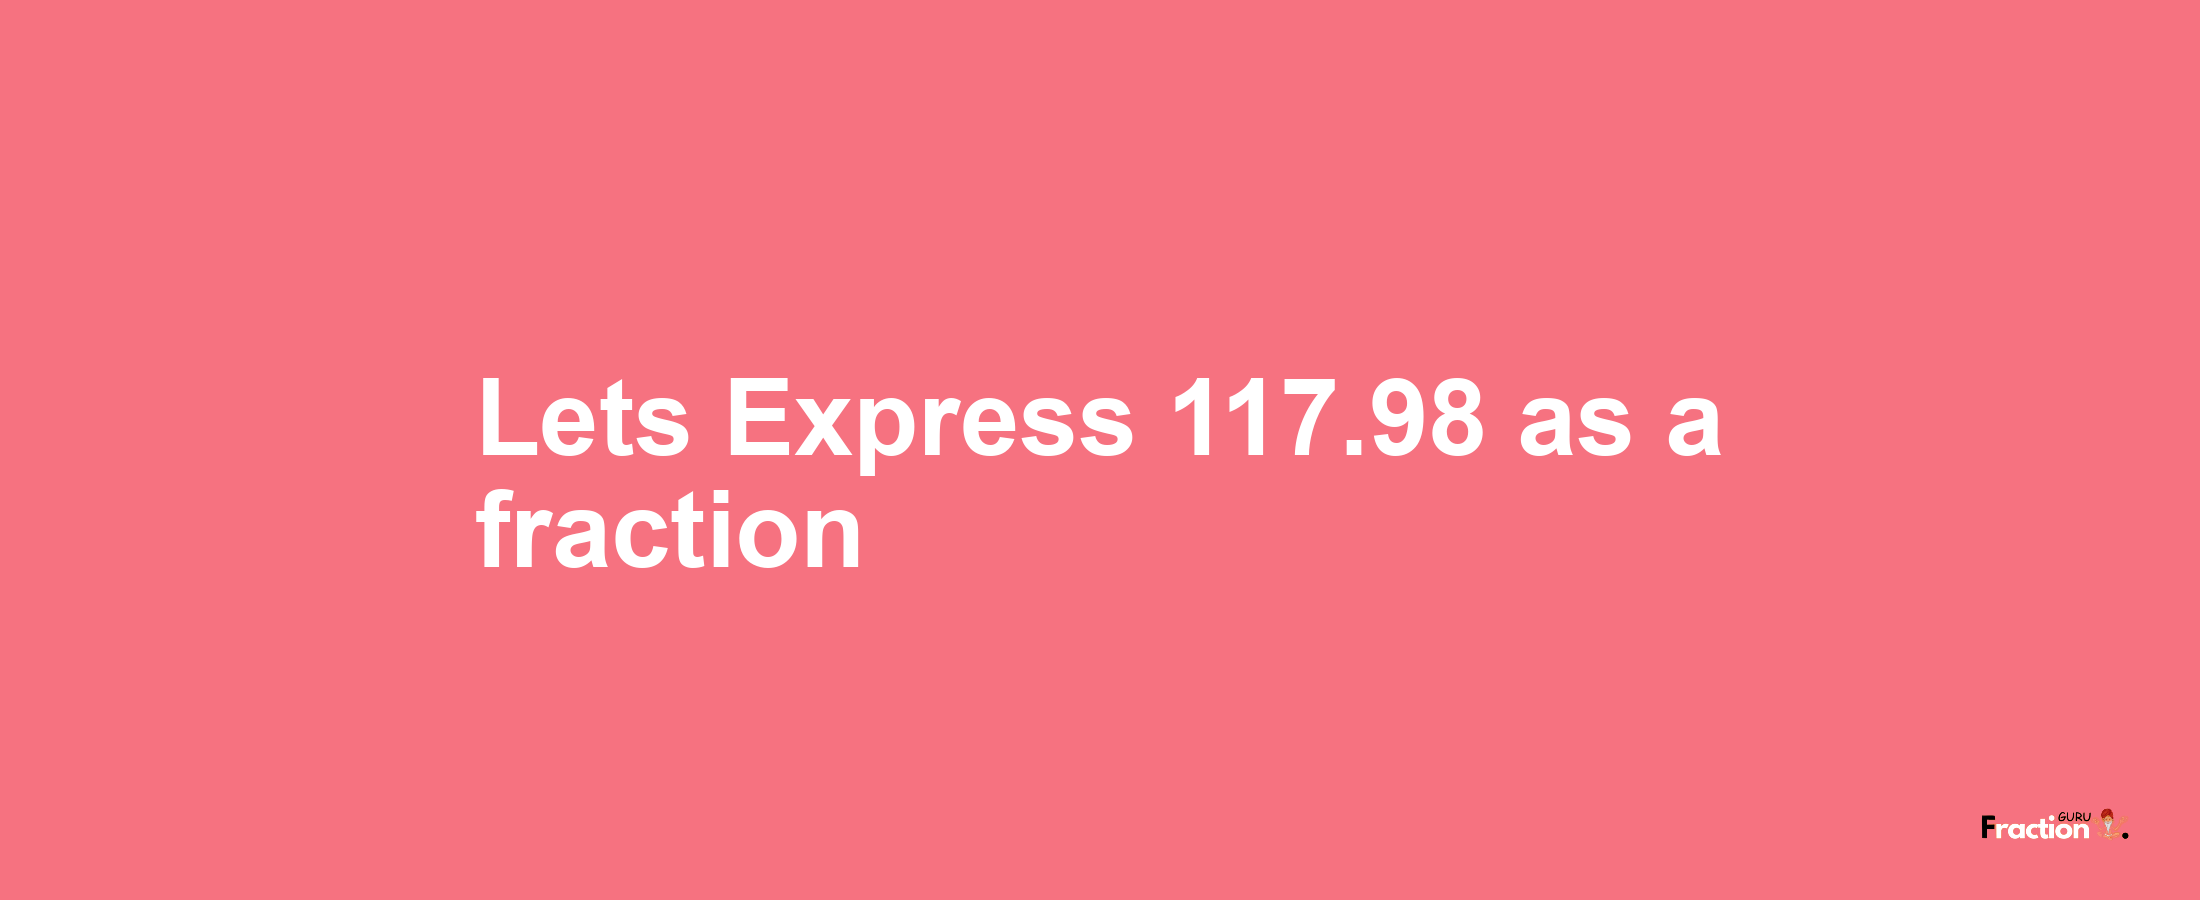 Lets Express 117.98 as afraction